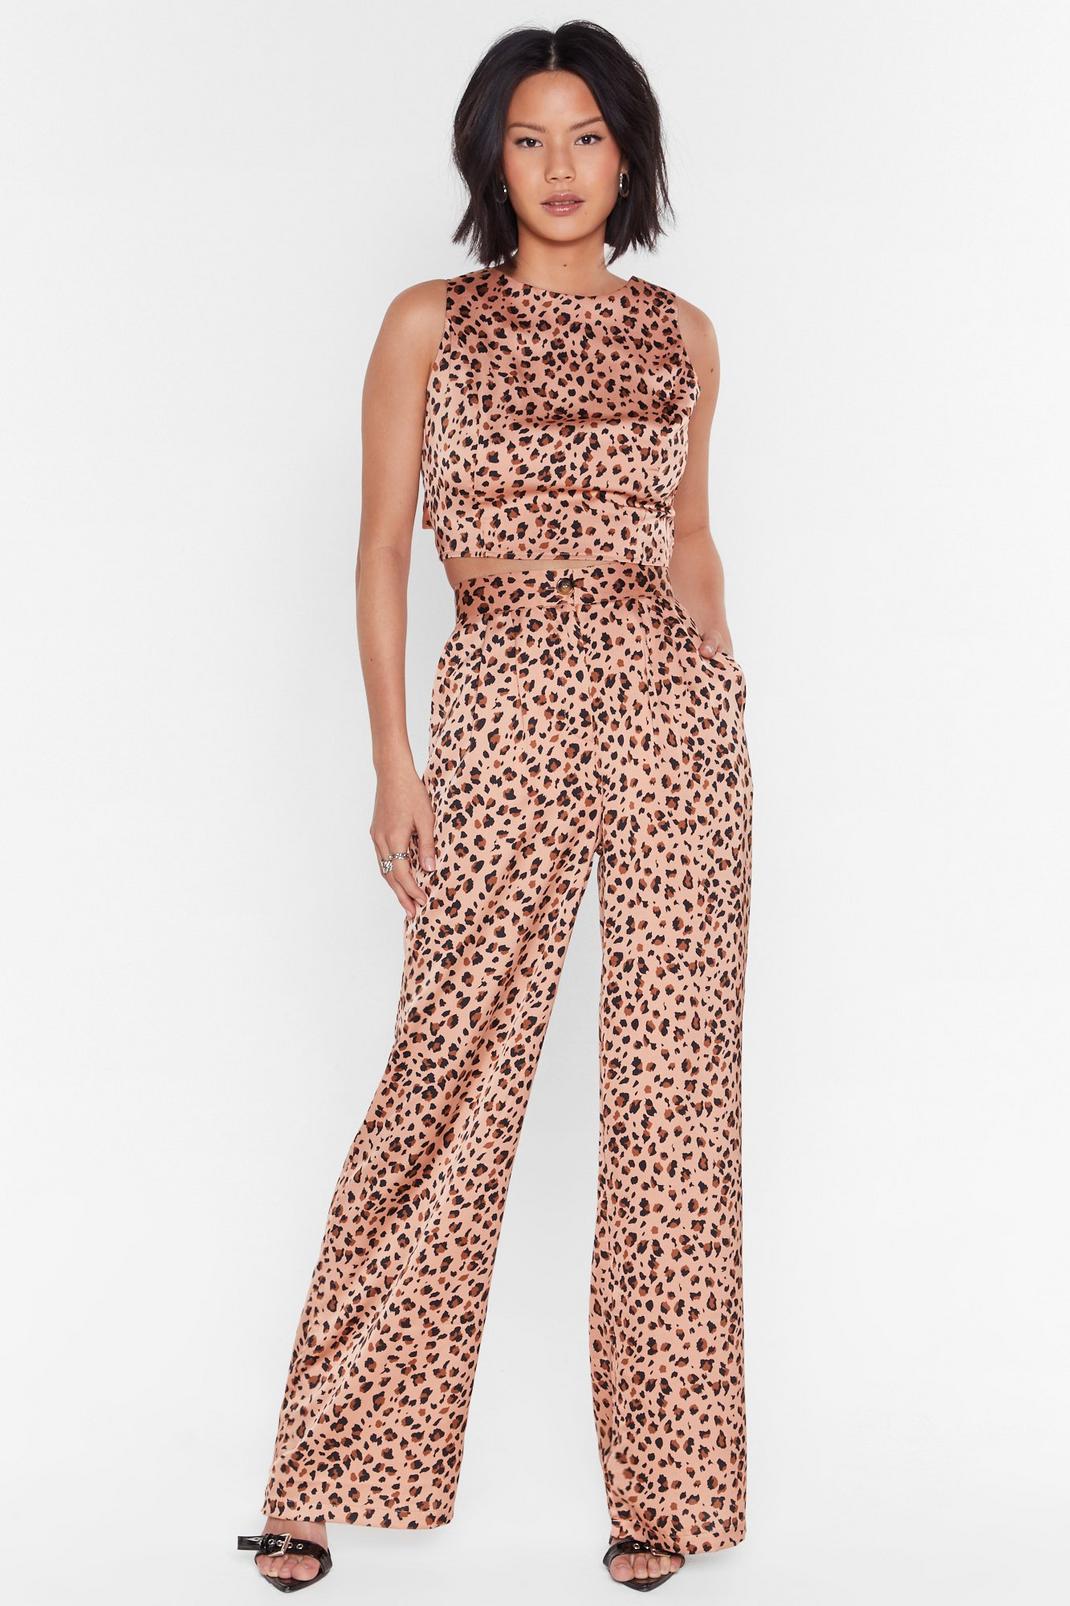 Blush Meow Does She Do It Leopard Satin Trousers image number 1